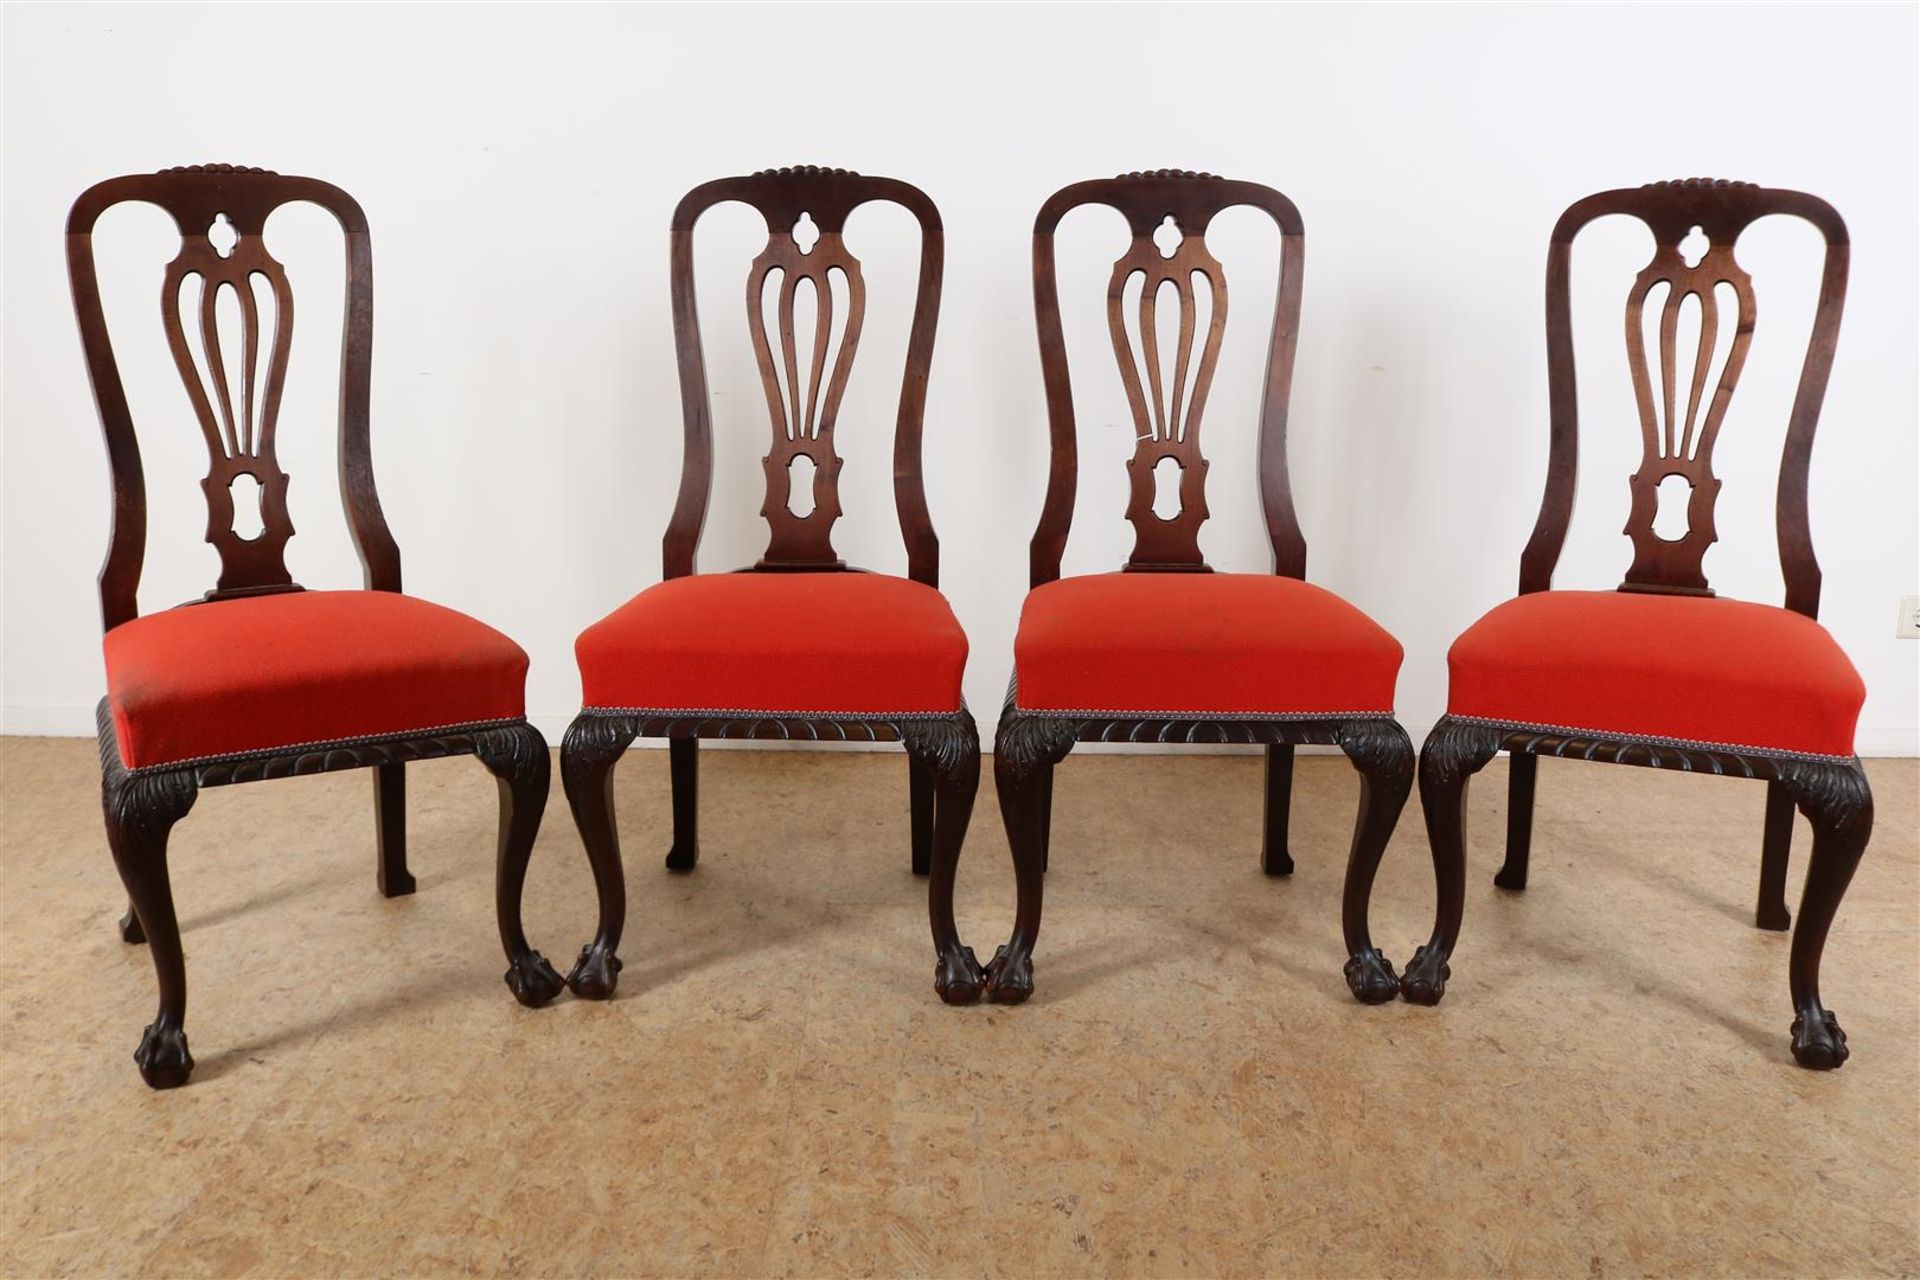 Series of 4 Chippendale-style chairs 